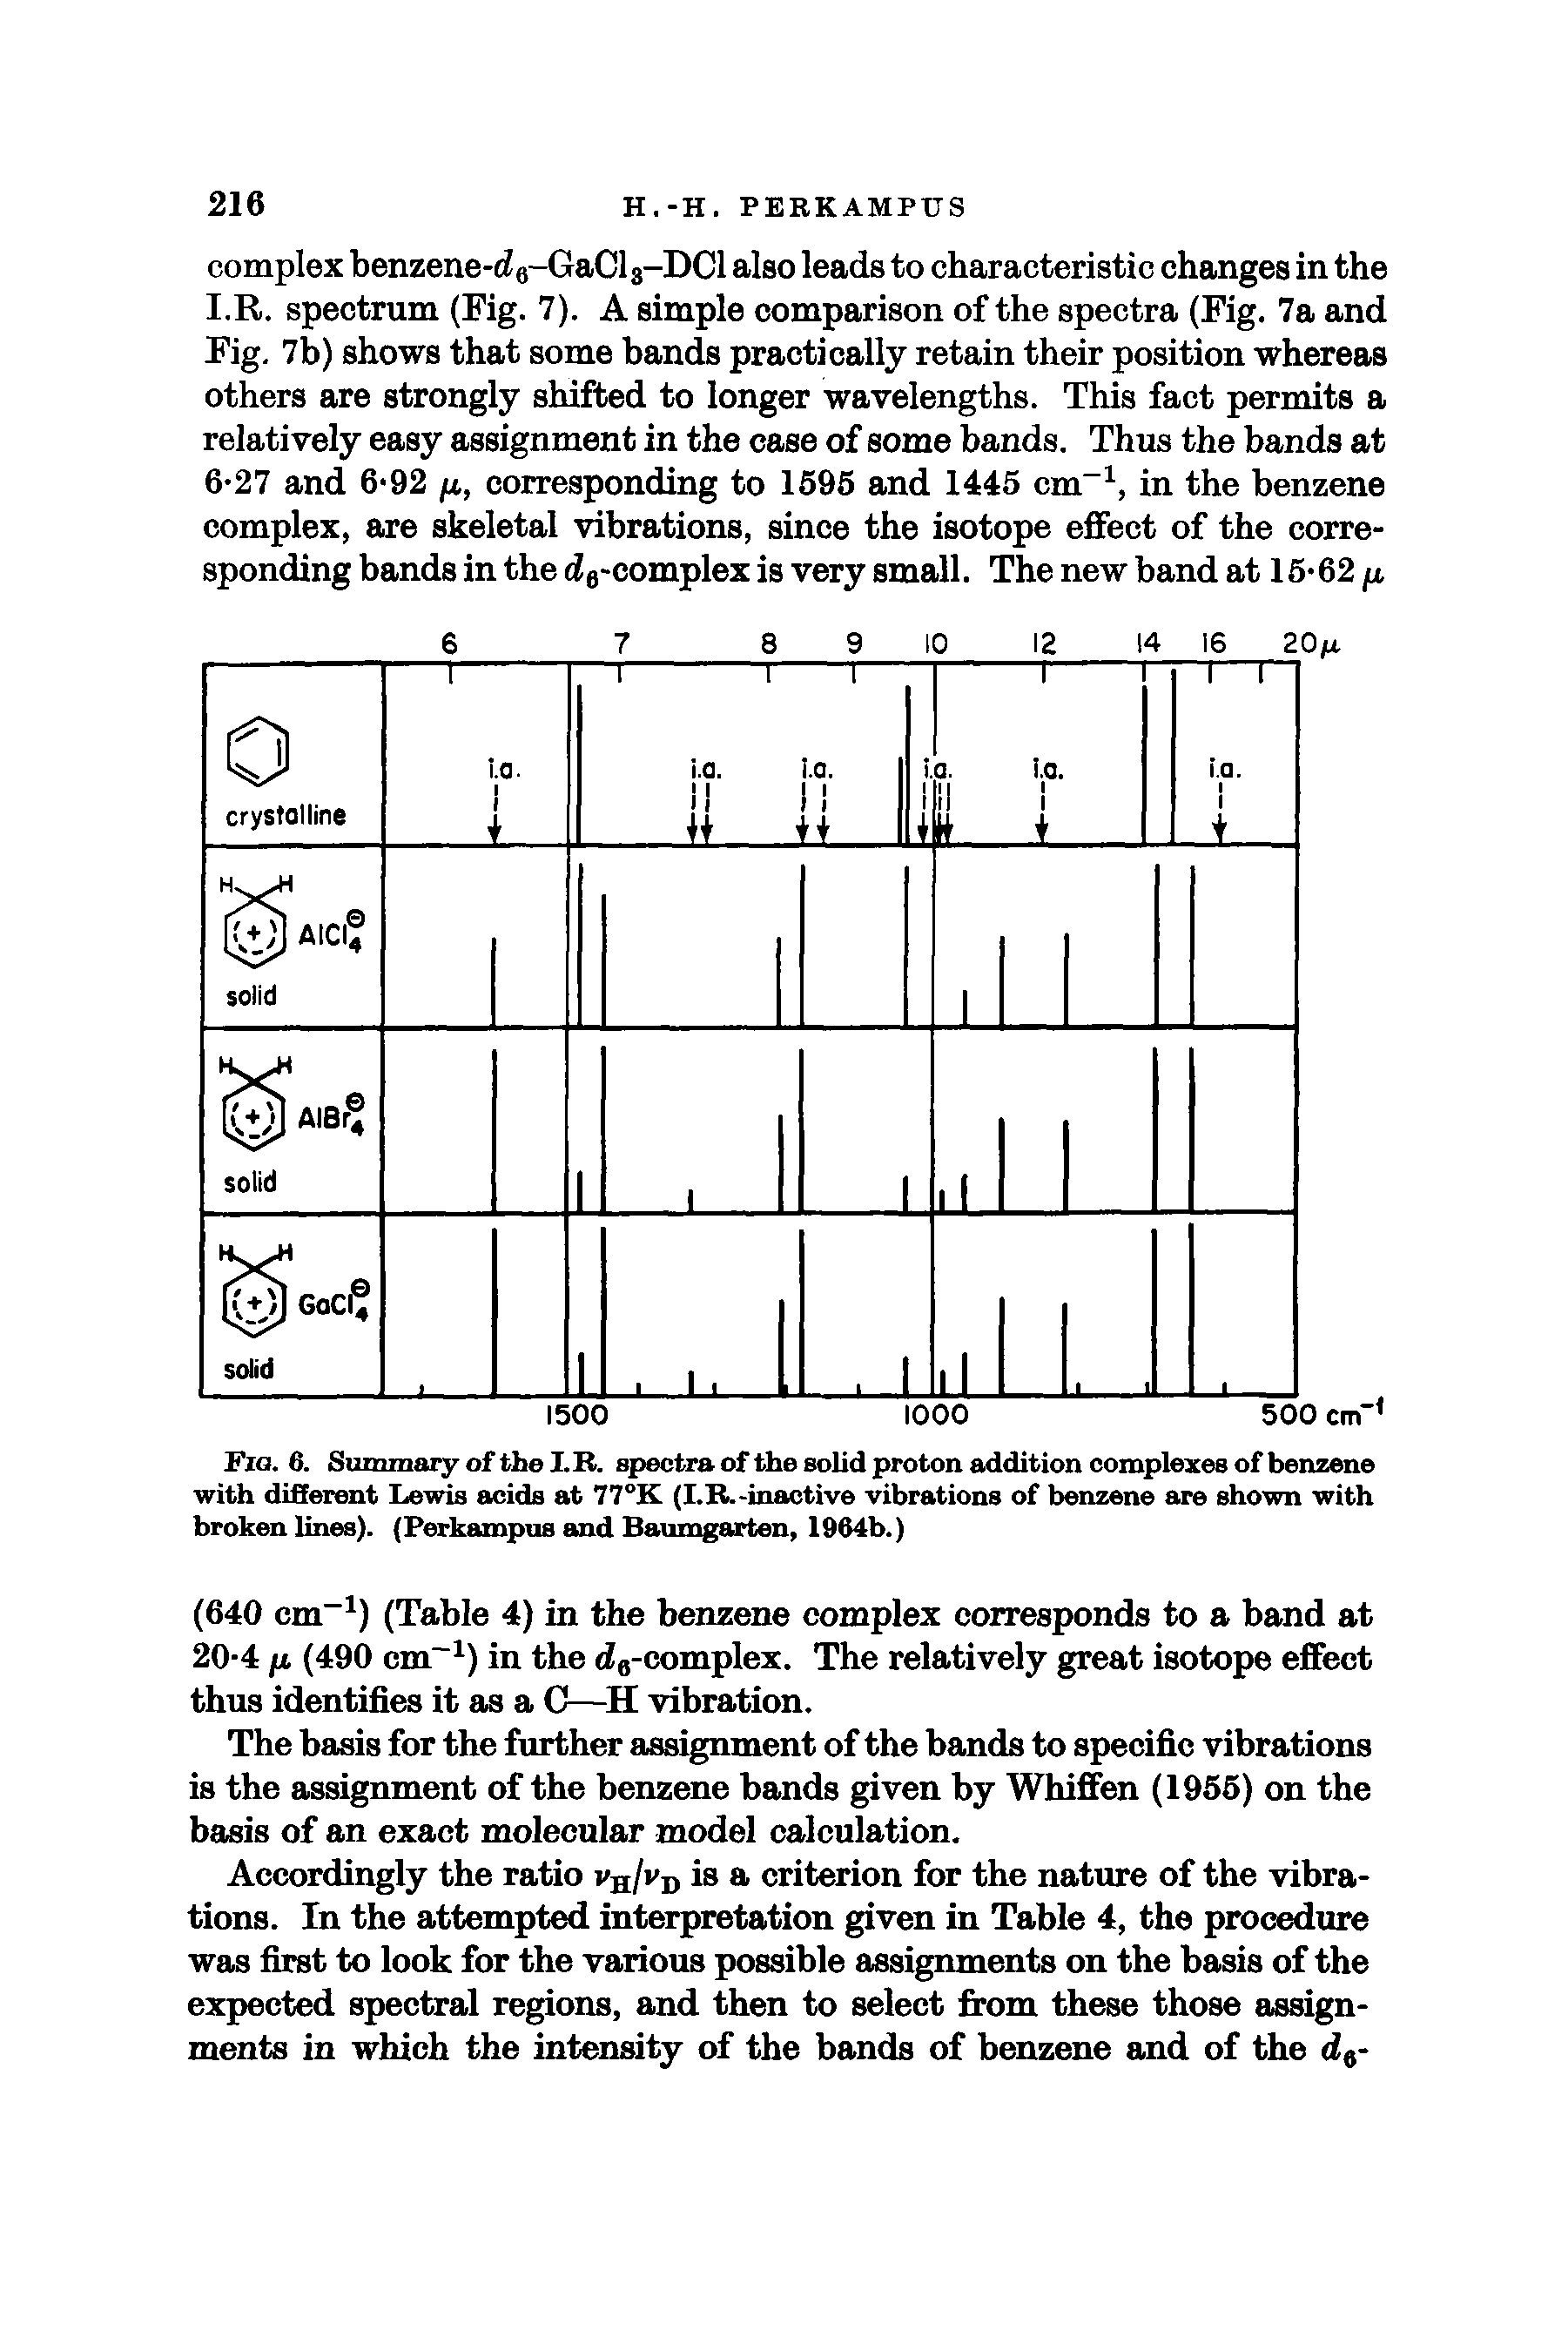 Fig. 6. Summary of the I.B. spectra of the solid proton addition complexes of benzene with different Lewis tuiids at 77°K (I.B.-inactive vibrations of benzene are shown with broken lines). (Perkampns and Baumgarten, 1964b.)...